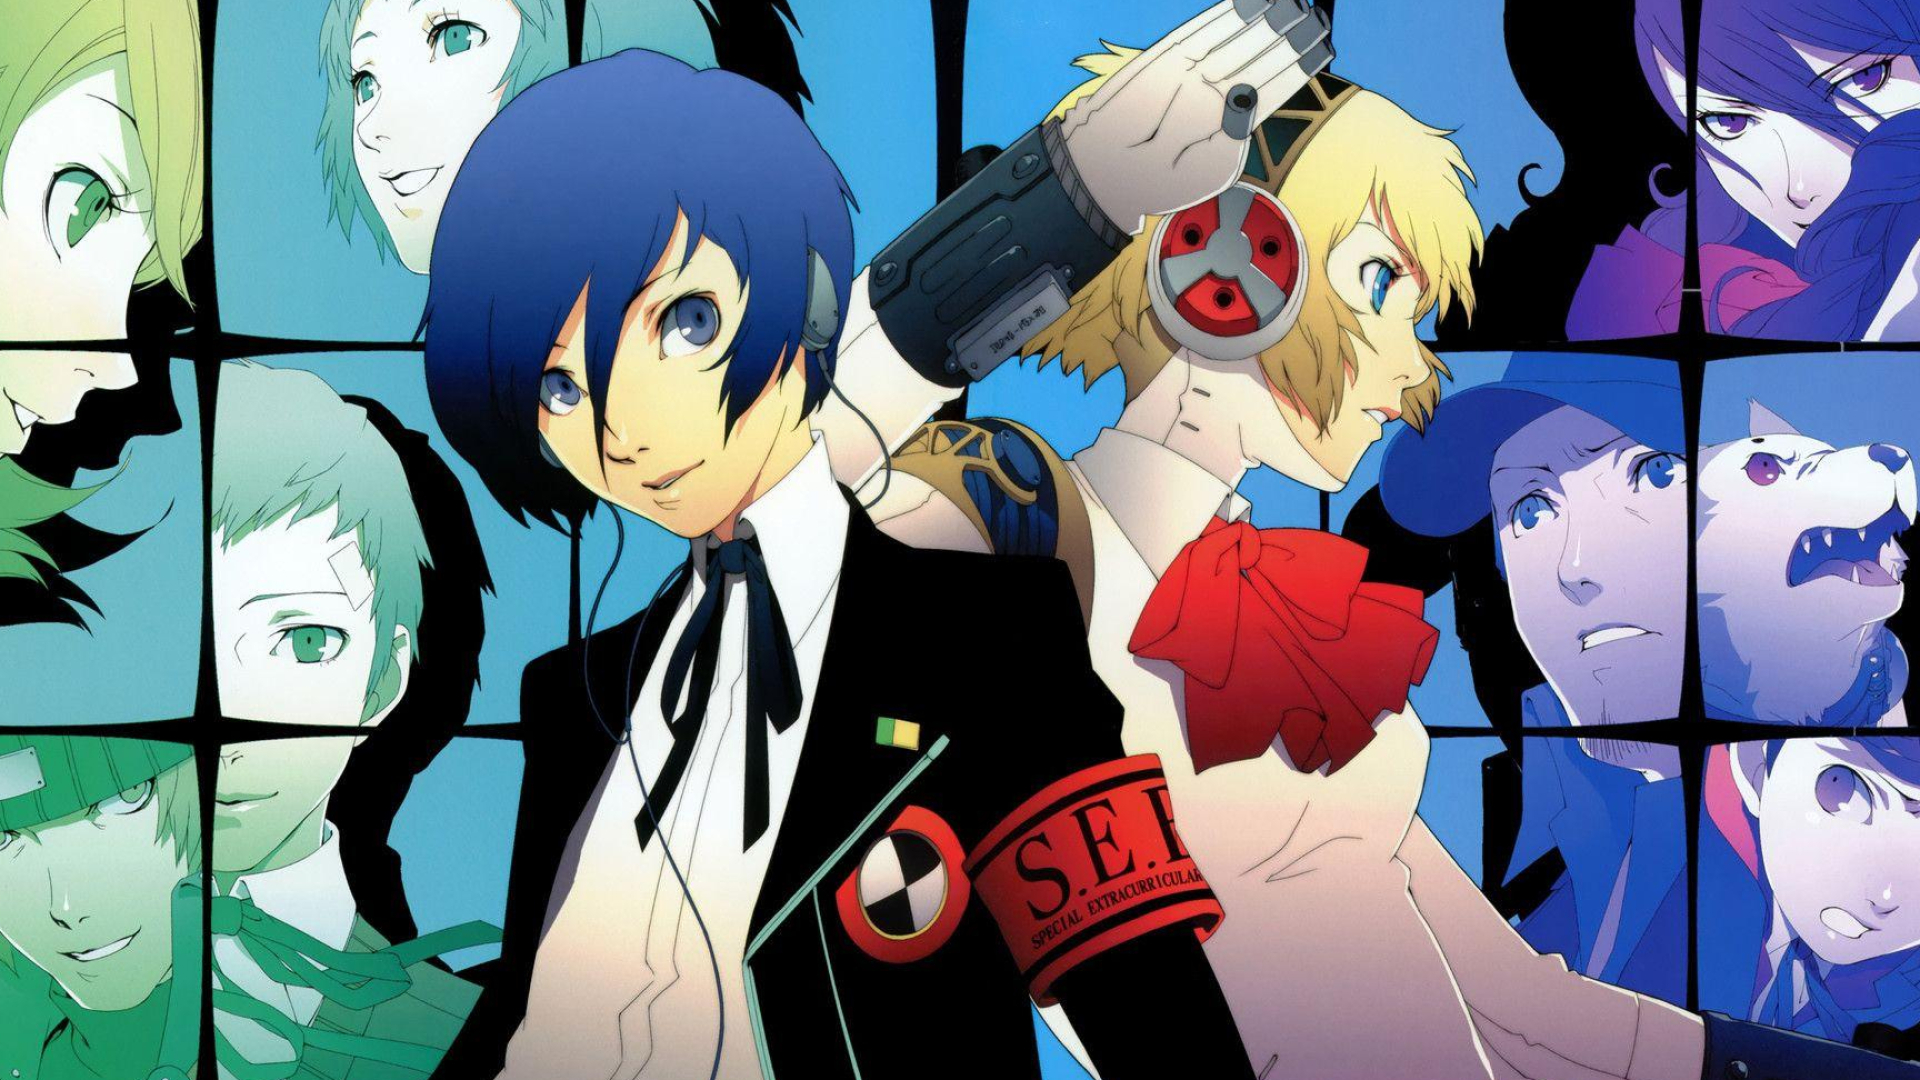 1920x1080 Persona 3 FES Wallpapers Top Free Persona 3 FES Backgrounds